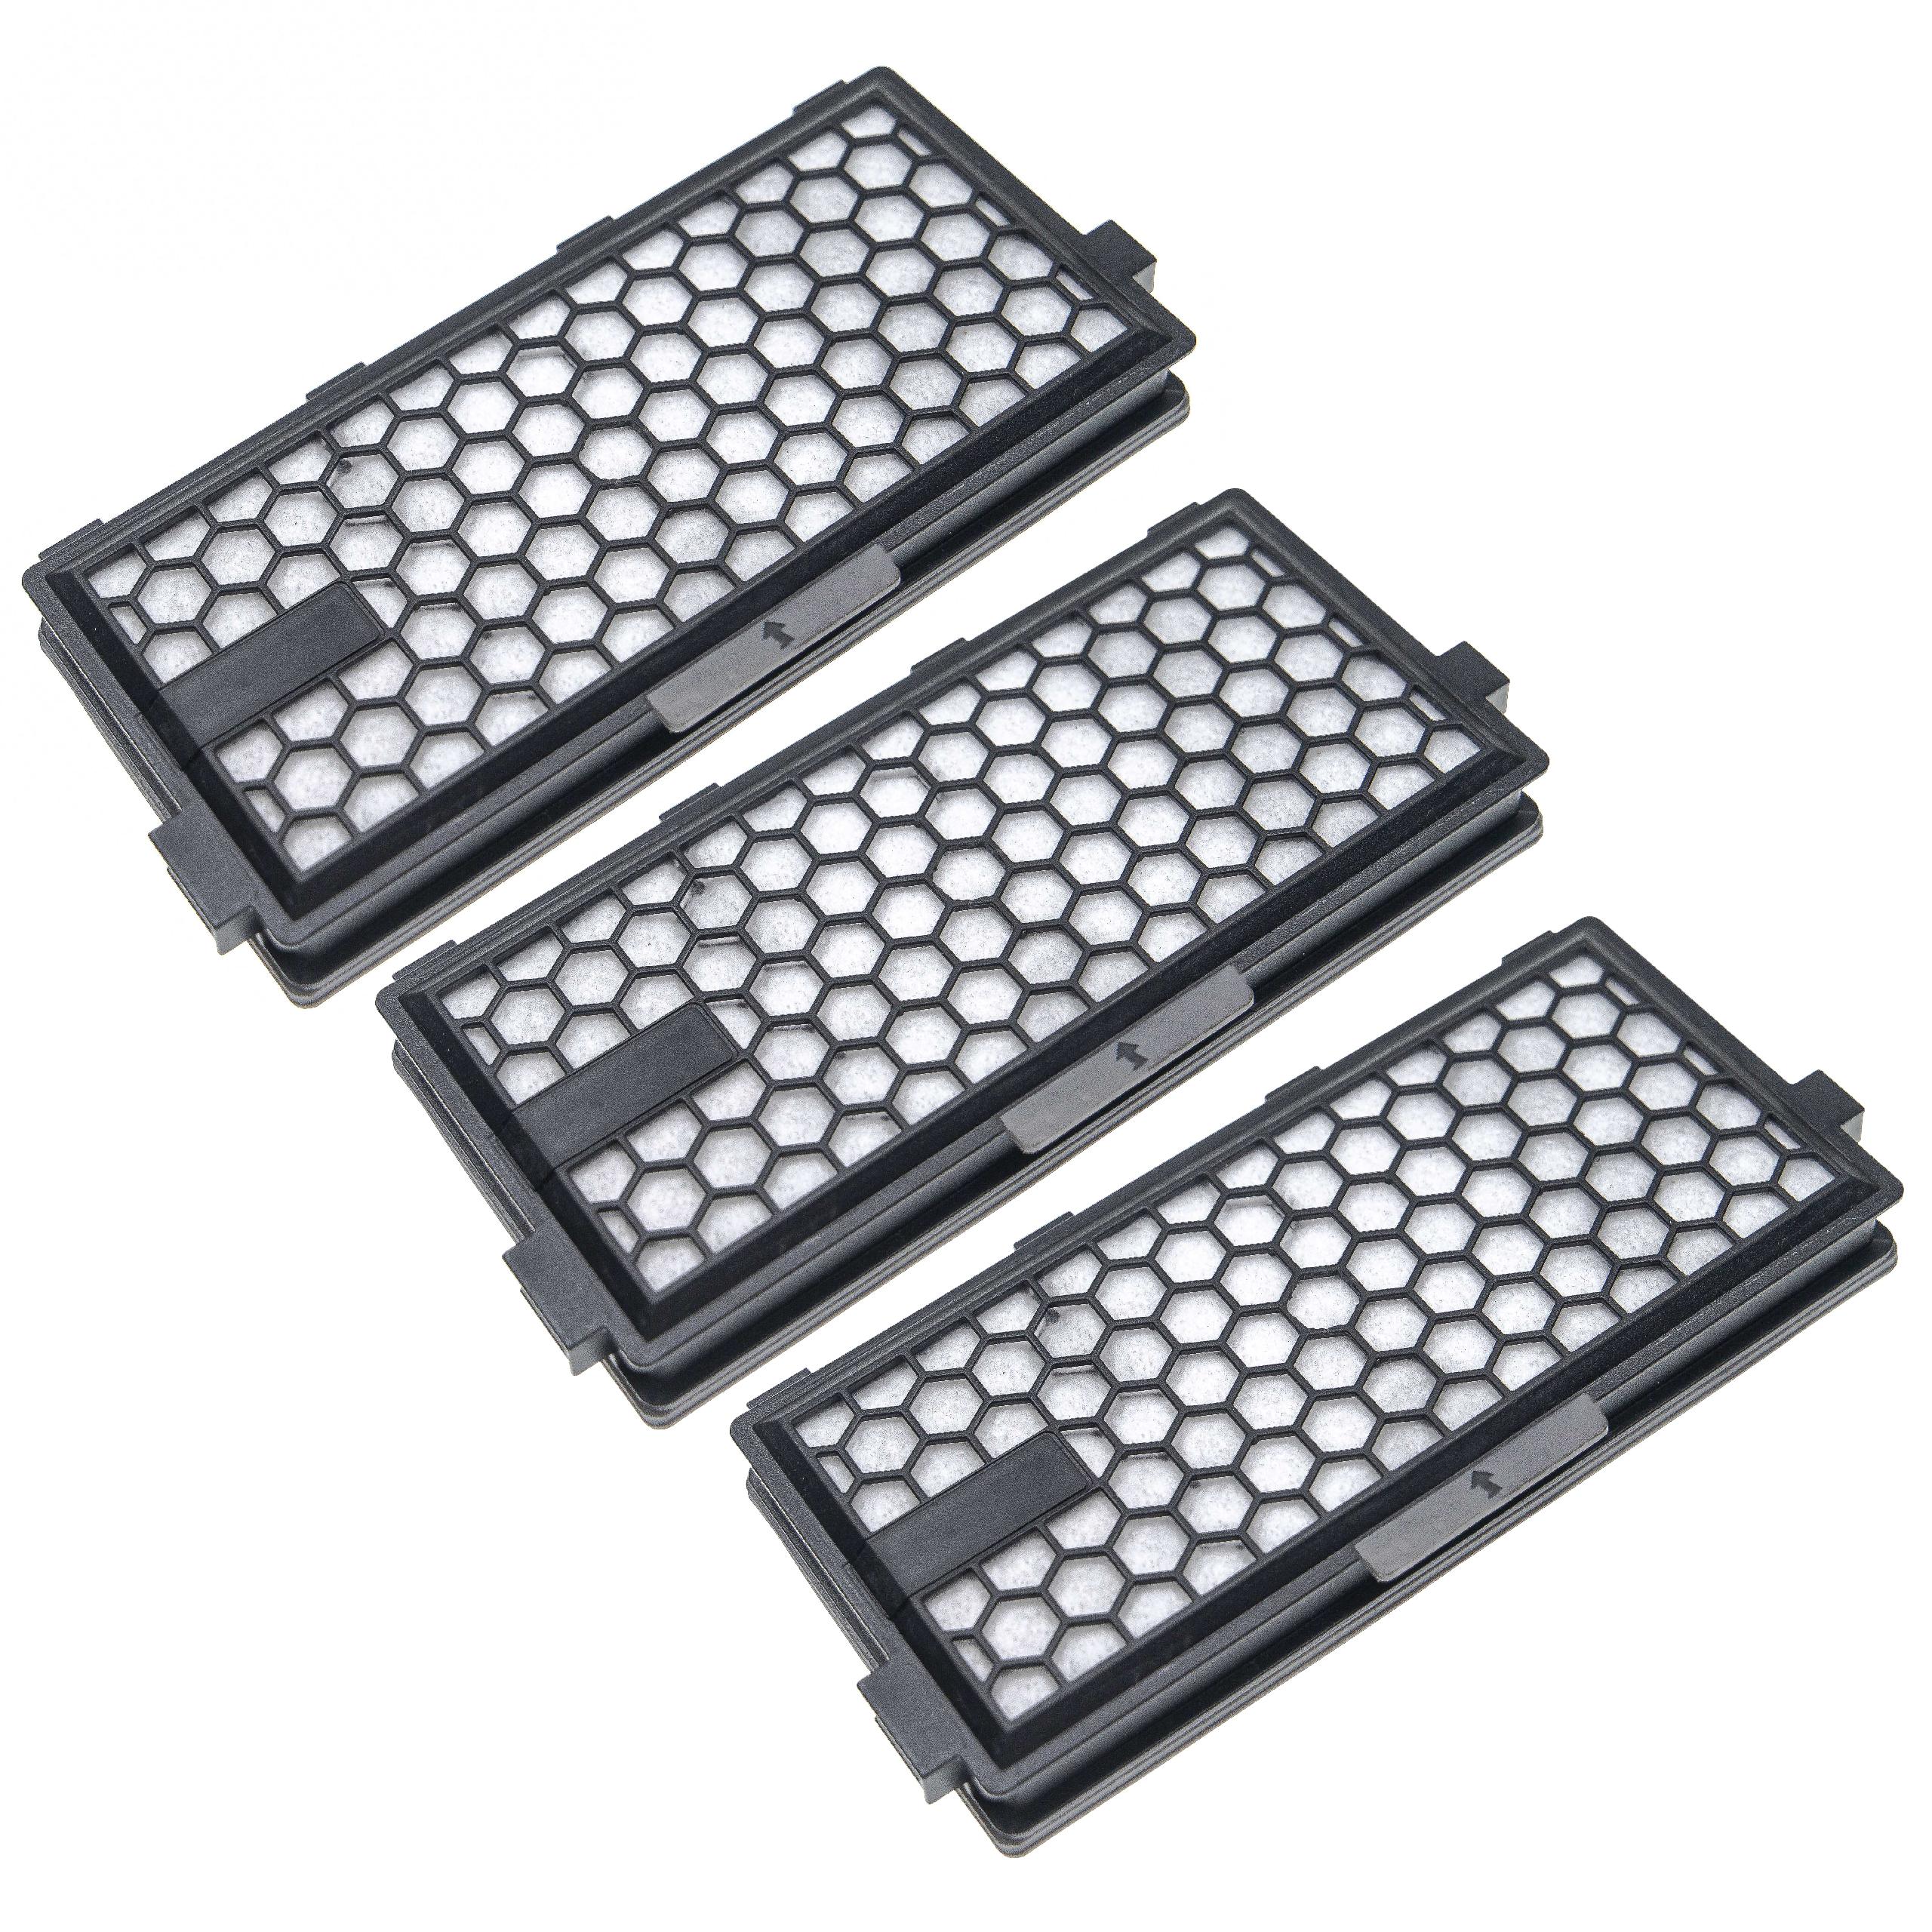 3x HEPA/activated carbon filter replaces Miele 5996882, 5996880, 5996881, 7226150 for MieleVacuum Cleaner